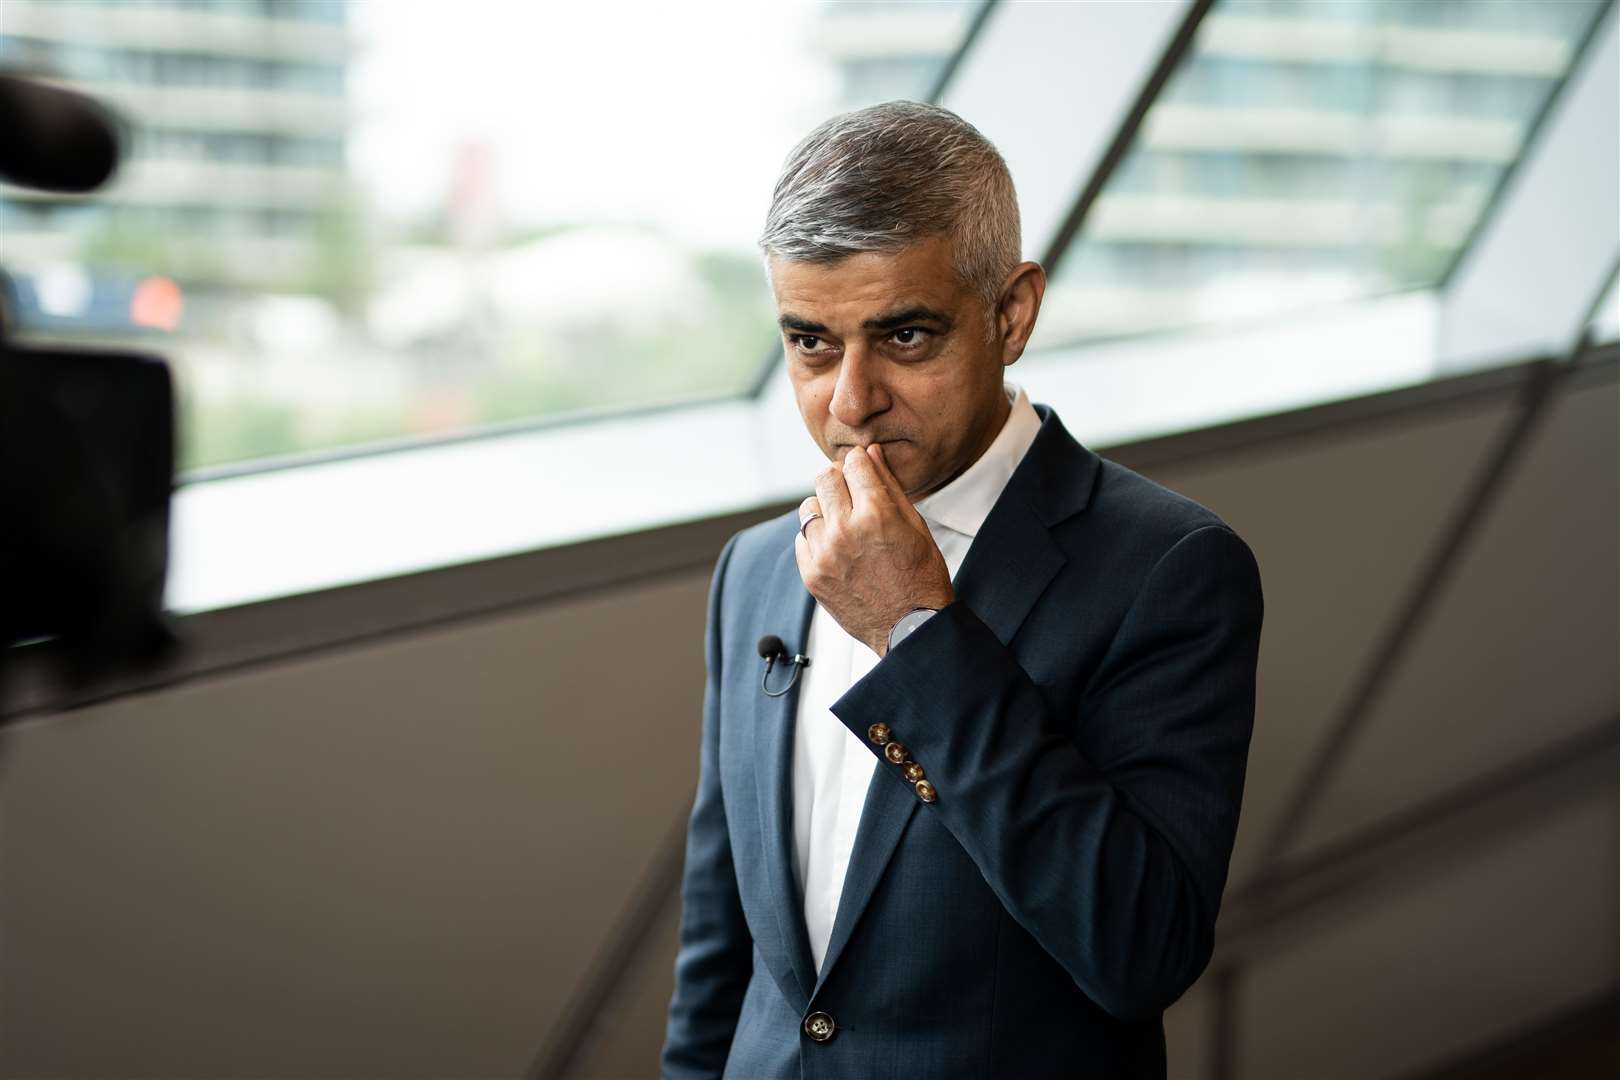 Sadiq Khan has faced strong opposition from Conservatives in the outer London boroughs over his plans to extend Ulez this year (Aaron Chown/PA)